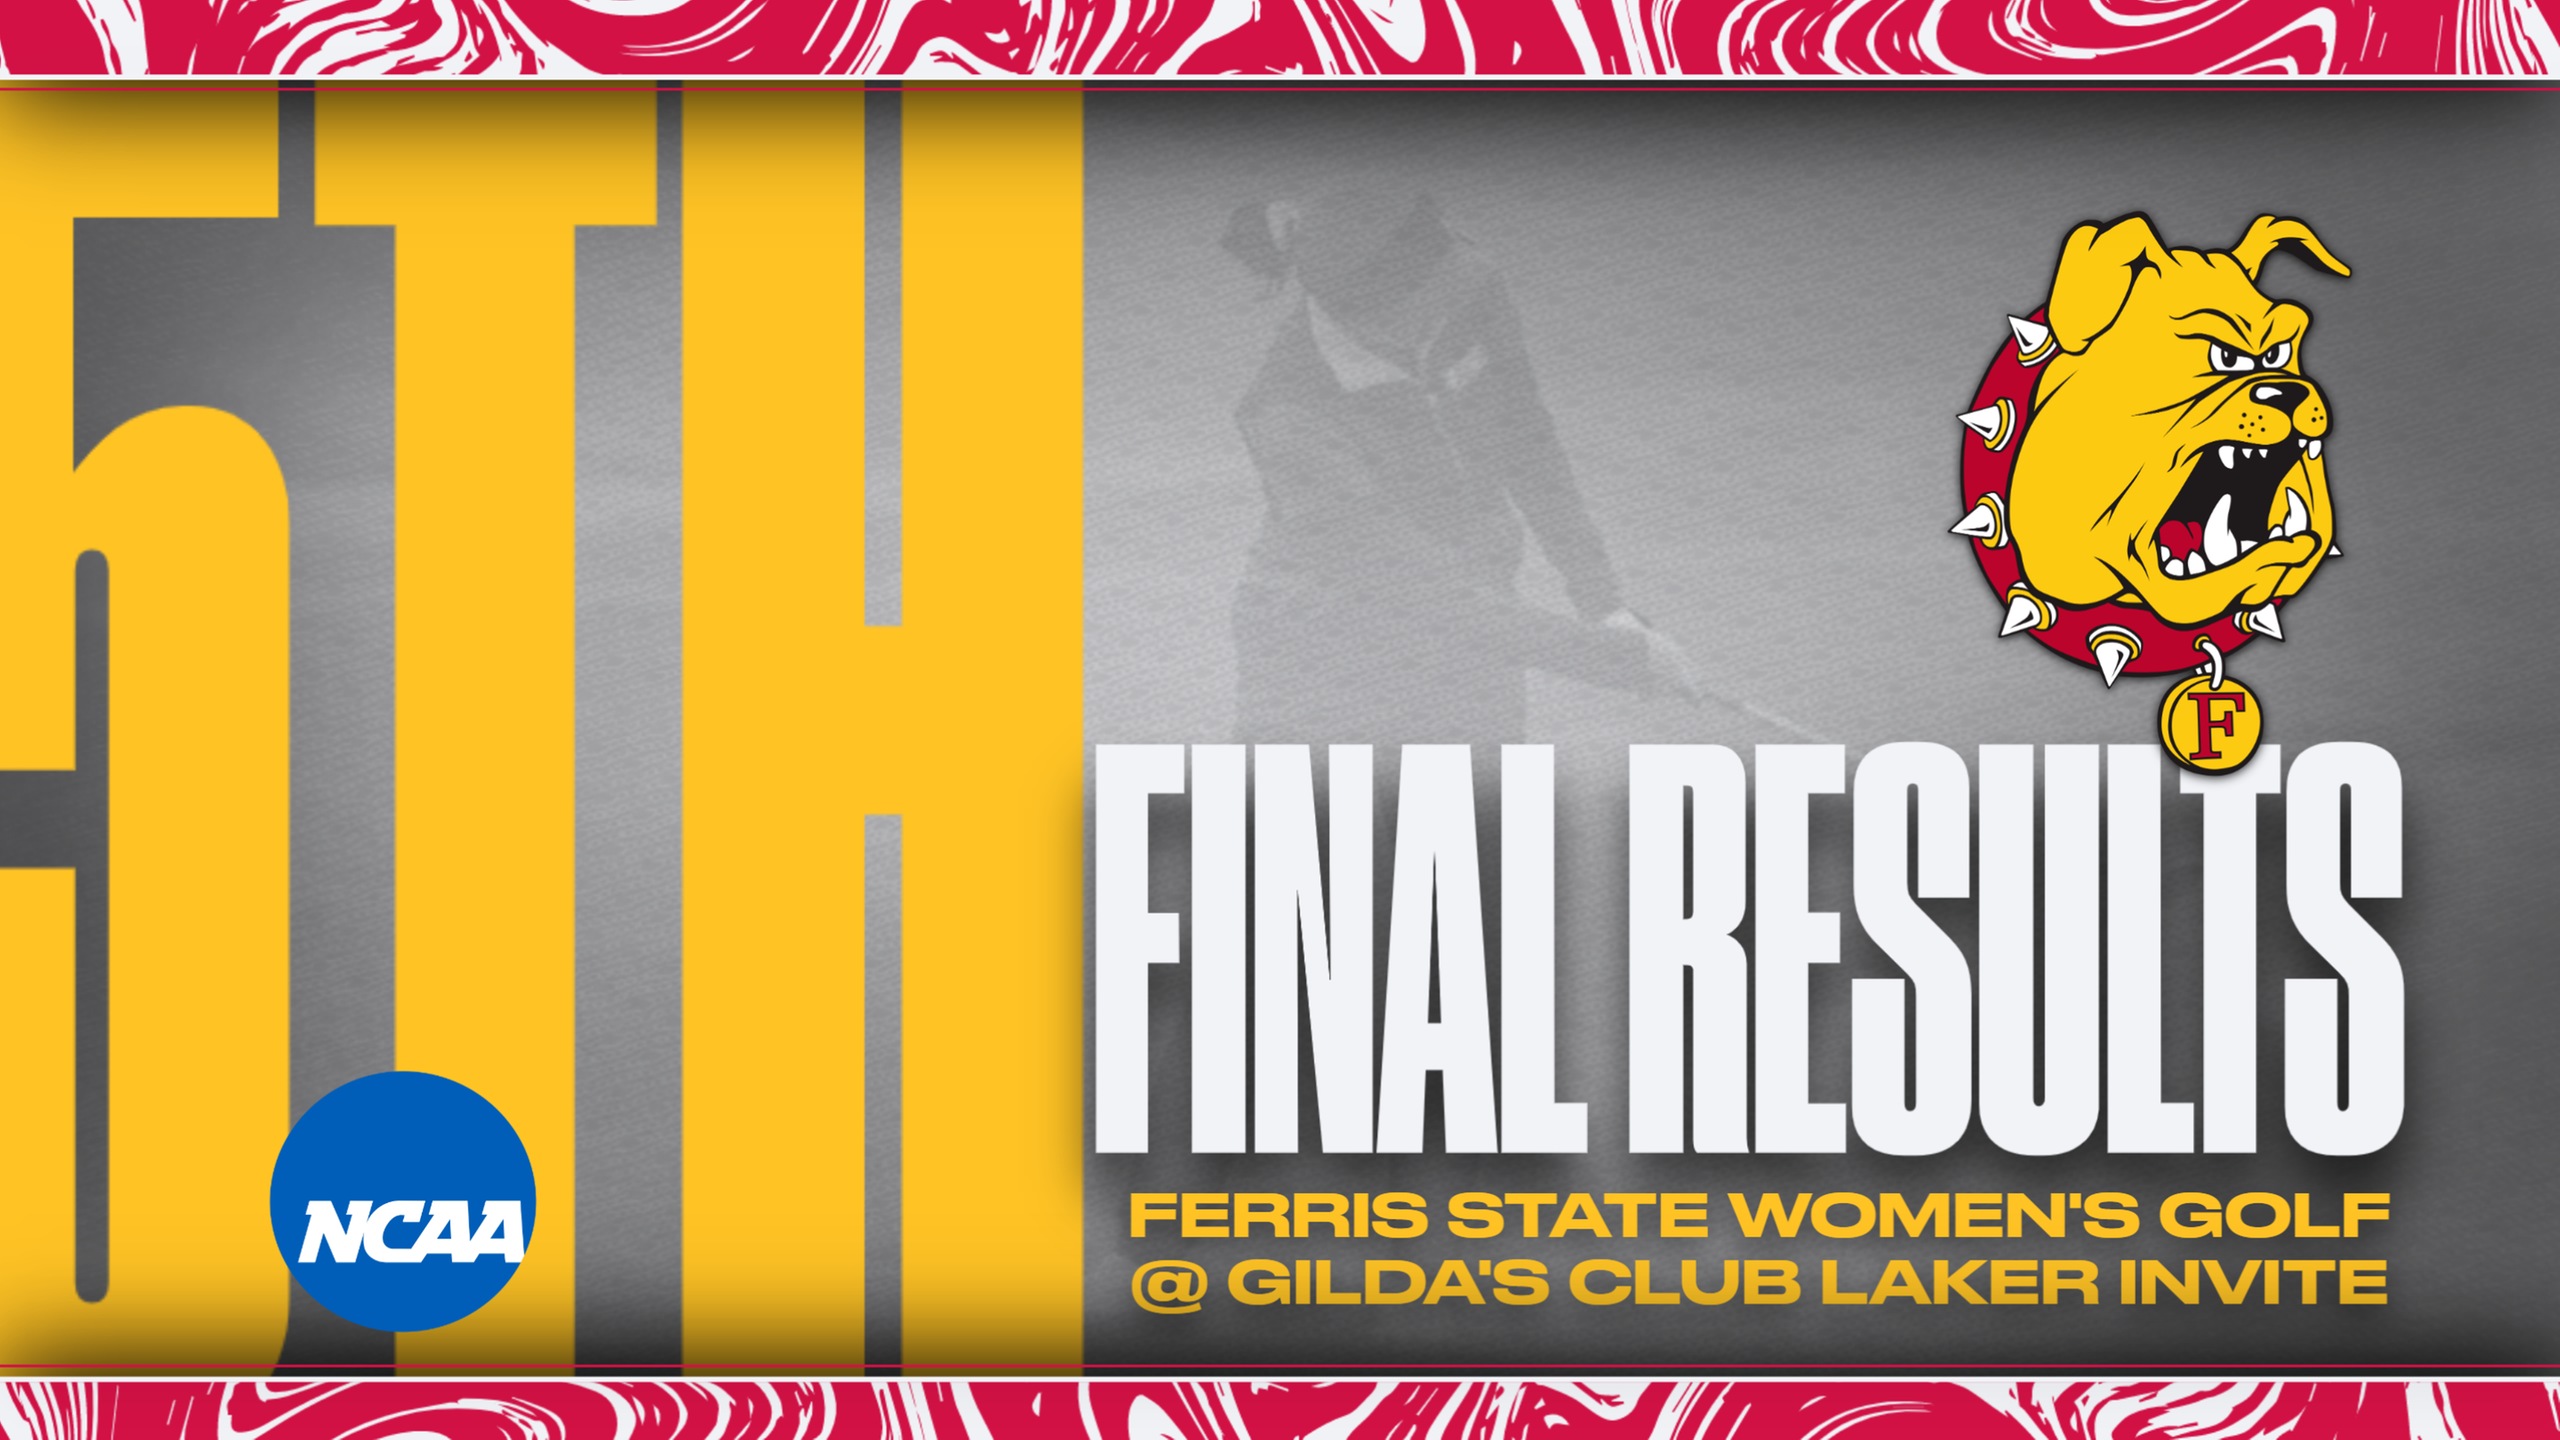 Ferris State Makes Dramatic Climb Up Leaderboard On Final Day To Finish 5th At Gilda's Club Invite